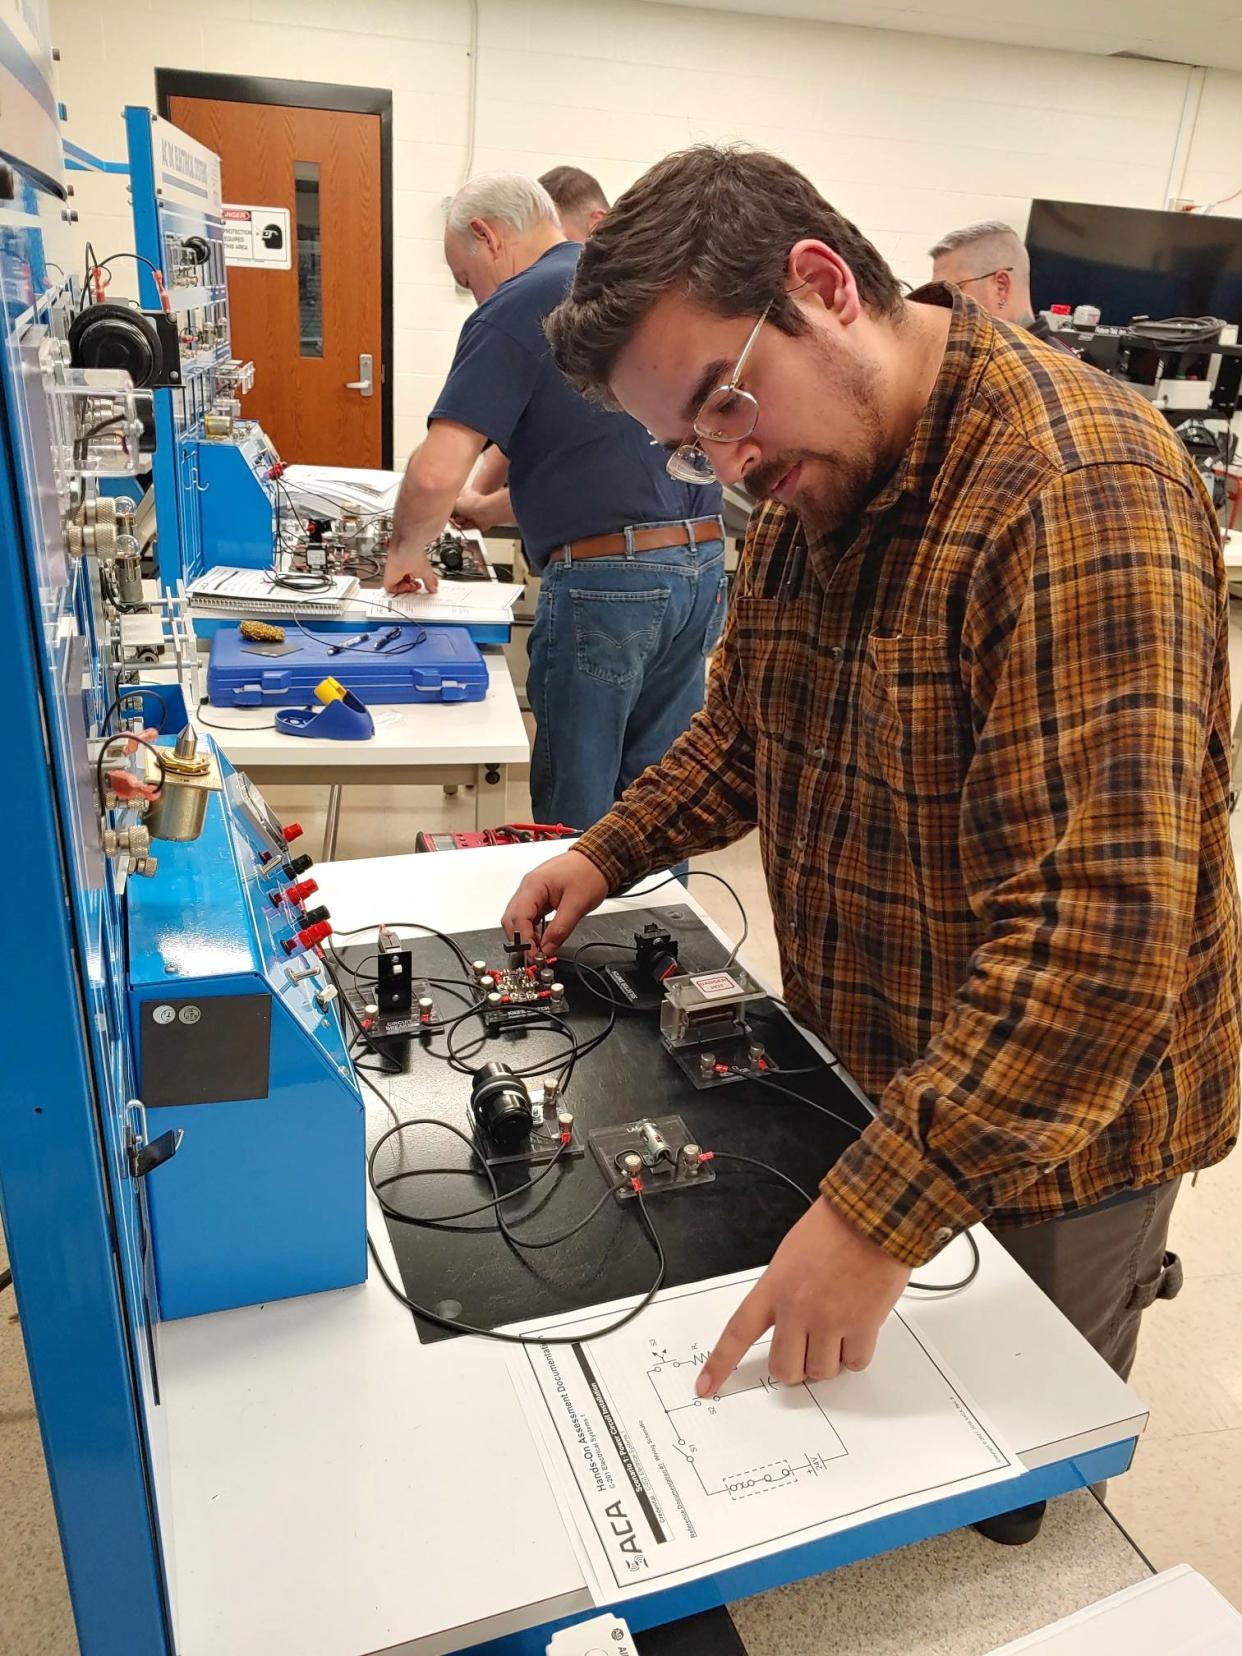 Gabriel Castillo uses equipment at the Bloomington Ivy Tech campus this month as part of his industrial electrical course in preparation for a certification exam.